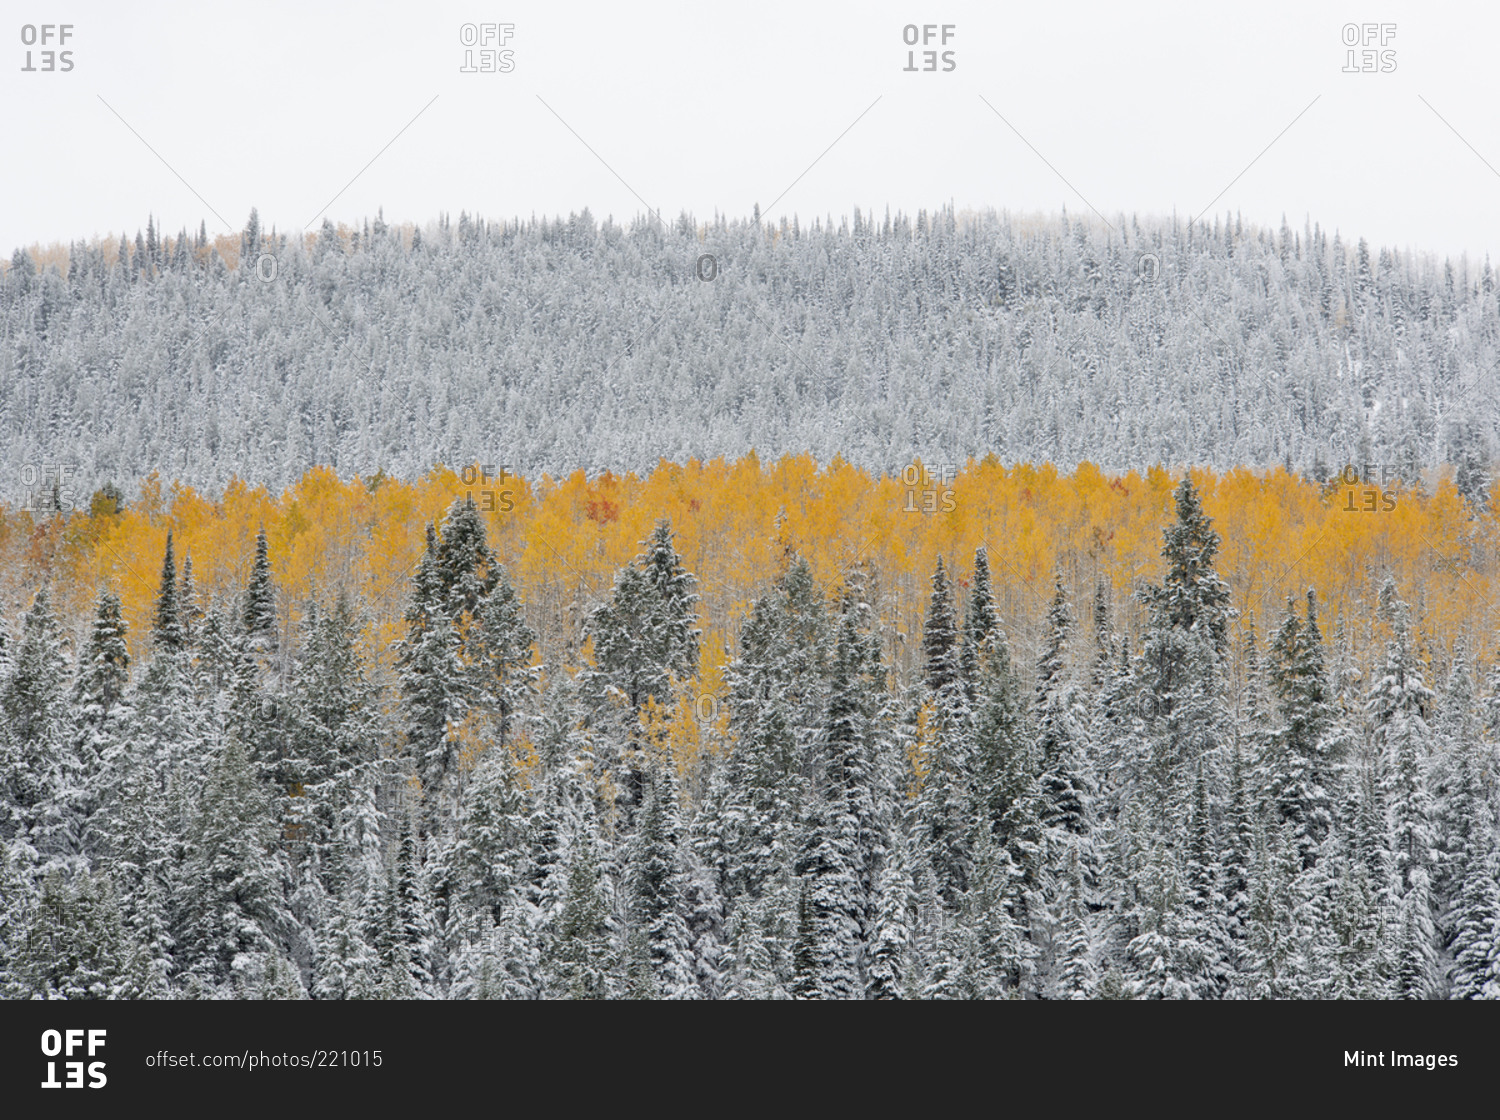 View over aspen forests in autumn, with a layer of vivid orange leaf color against pine trees